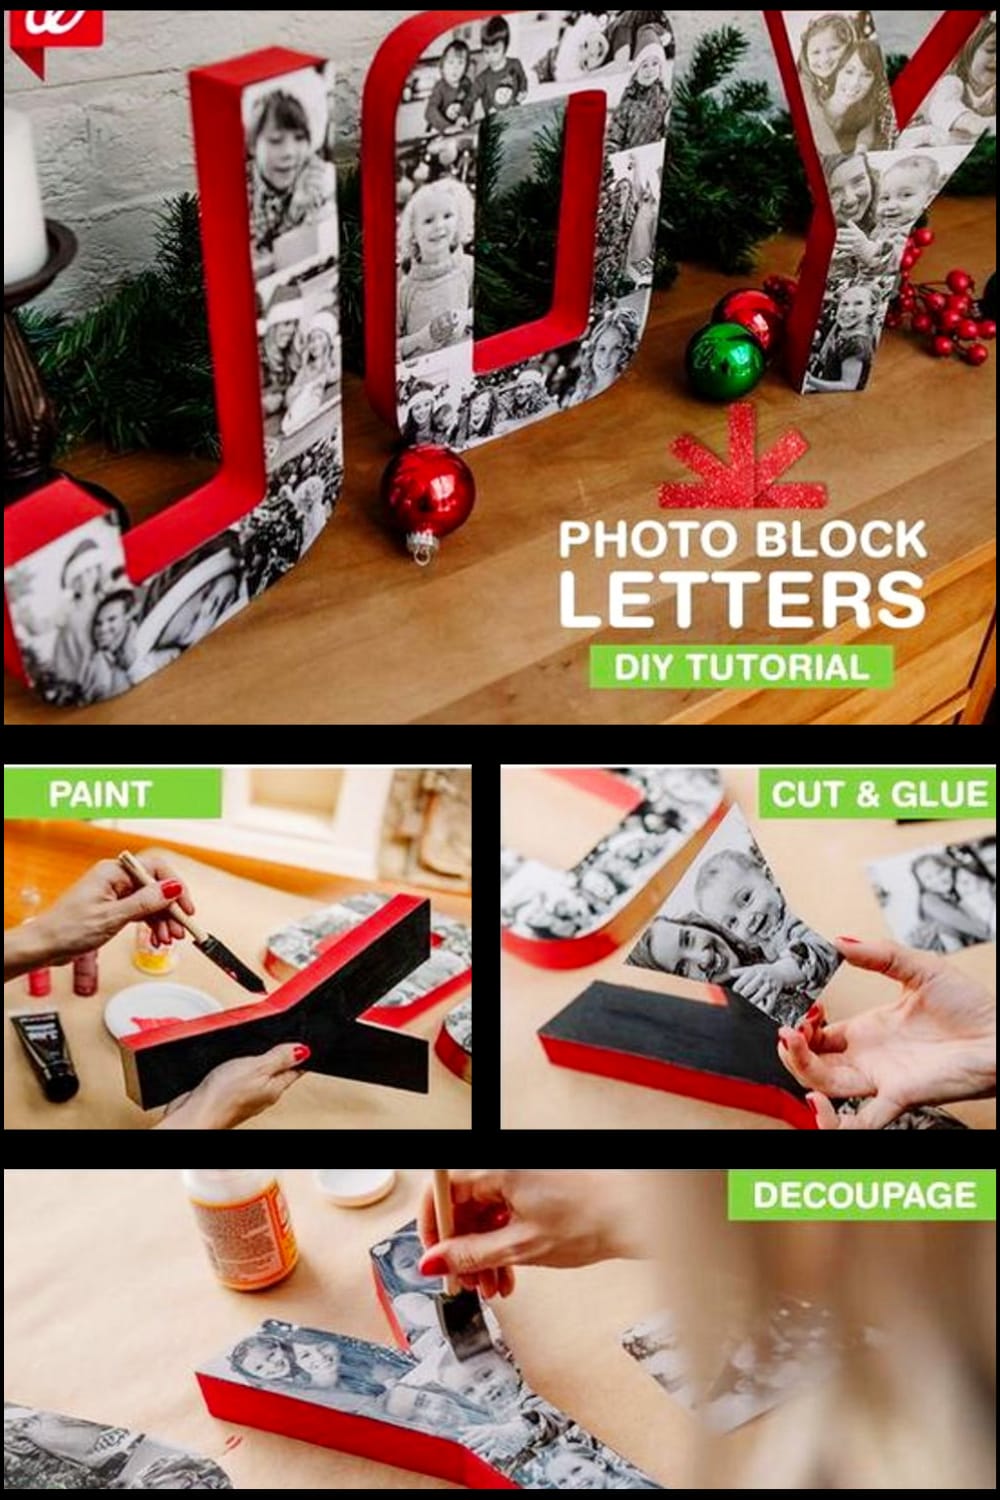 Wooden letter photo collage ideas and tutorials - how to make a picture collage on wood letters or on cardboard.  Super creative letter picture collage ideas like this Christmas wooden word photo collage to give as a handmade Christmas gift or to decorate your house in the Holiday spirit this Christmas